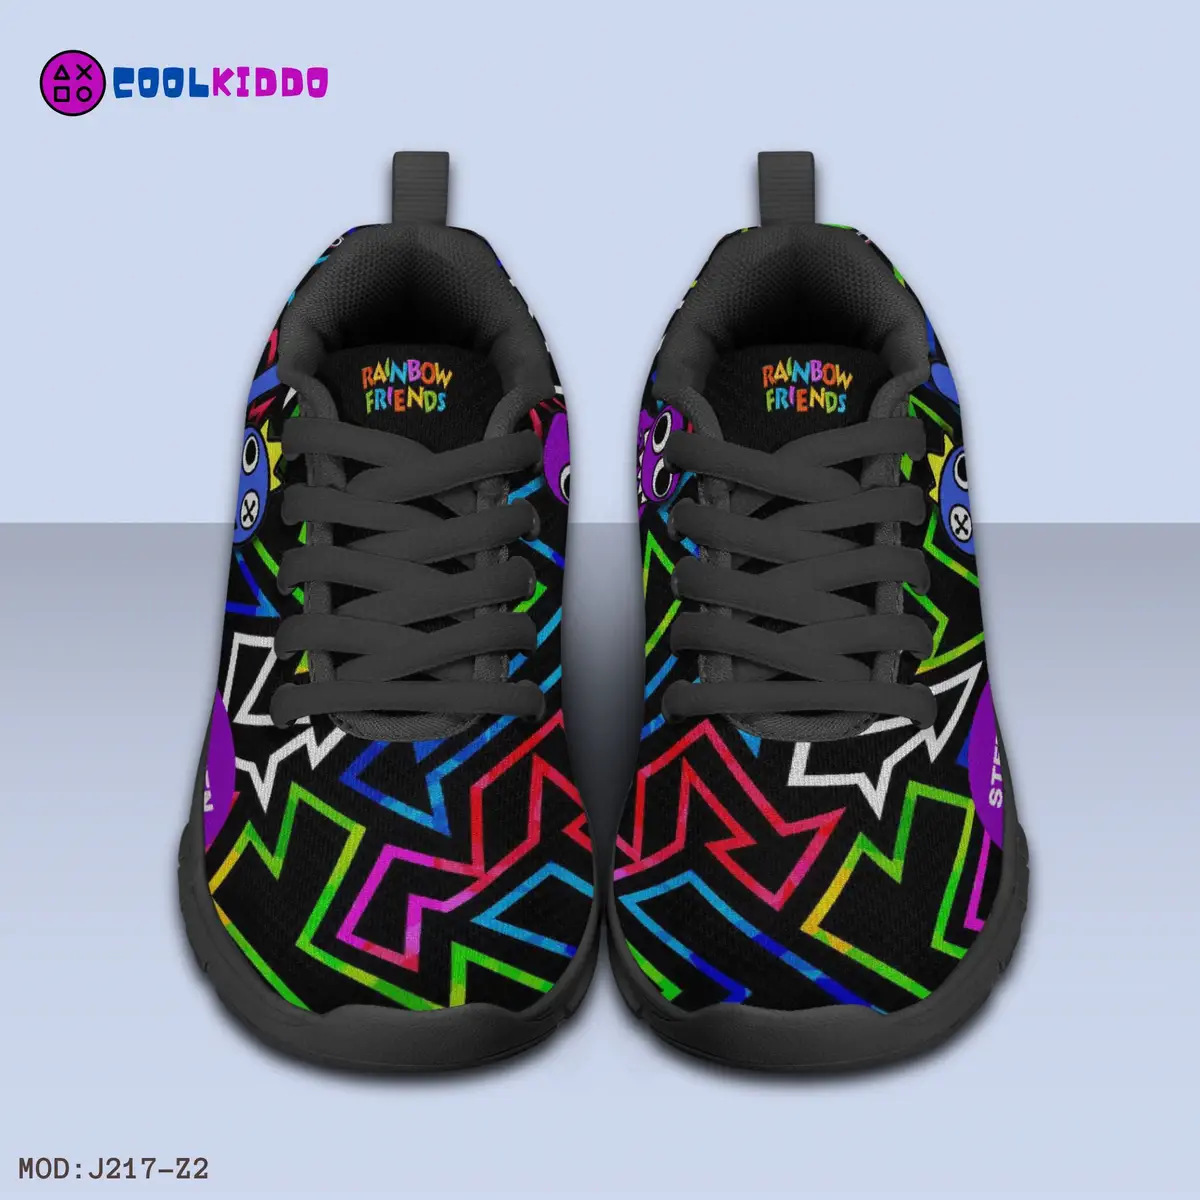 Personalized Rainbow Friends Inspired Kids/Youth Lightweight Mesh Sneakers Cool Kiddo 22